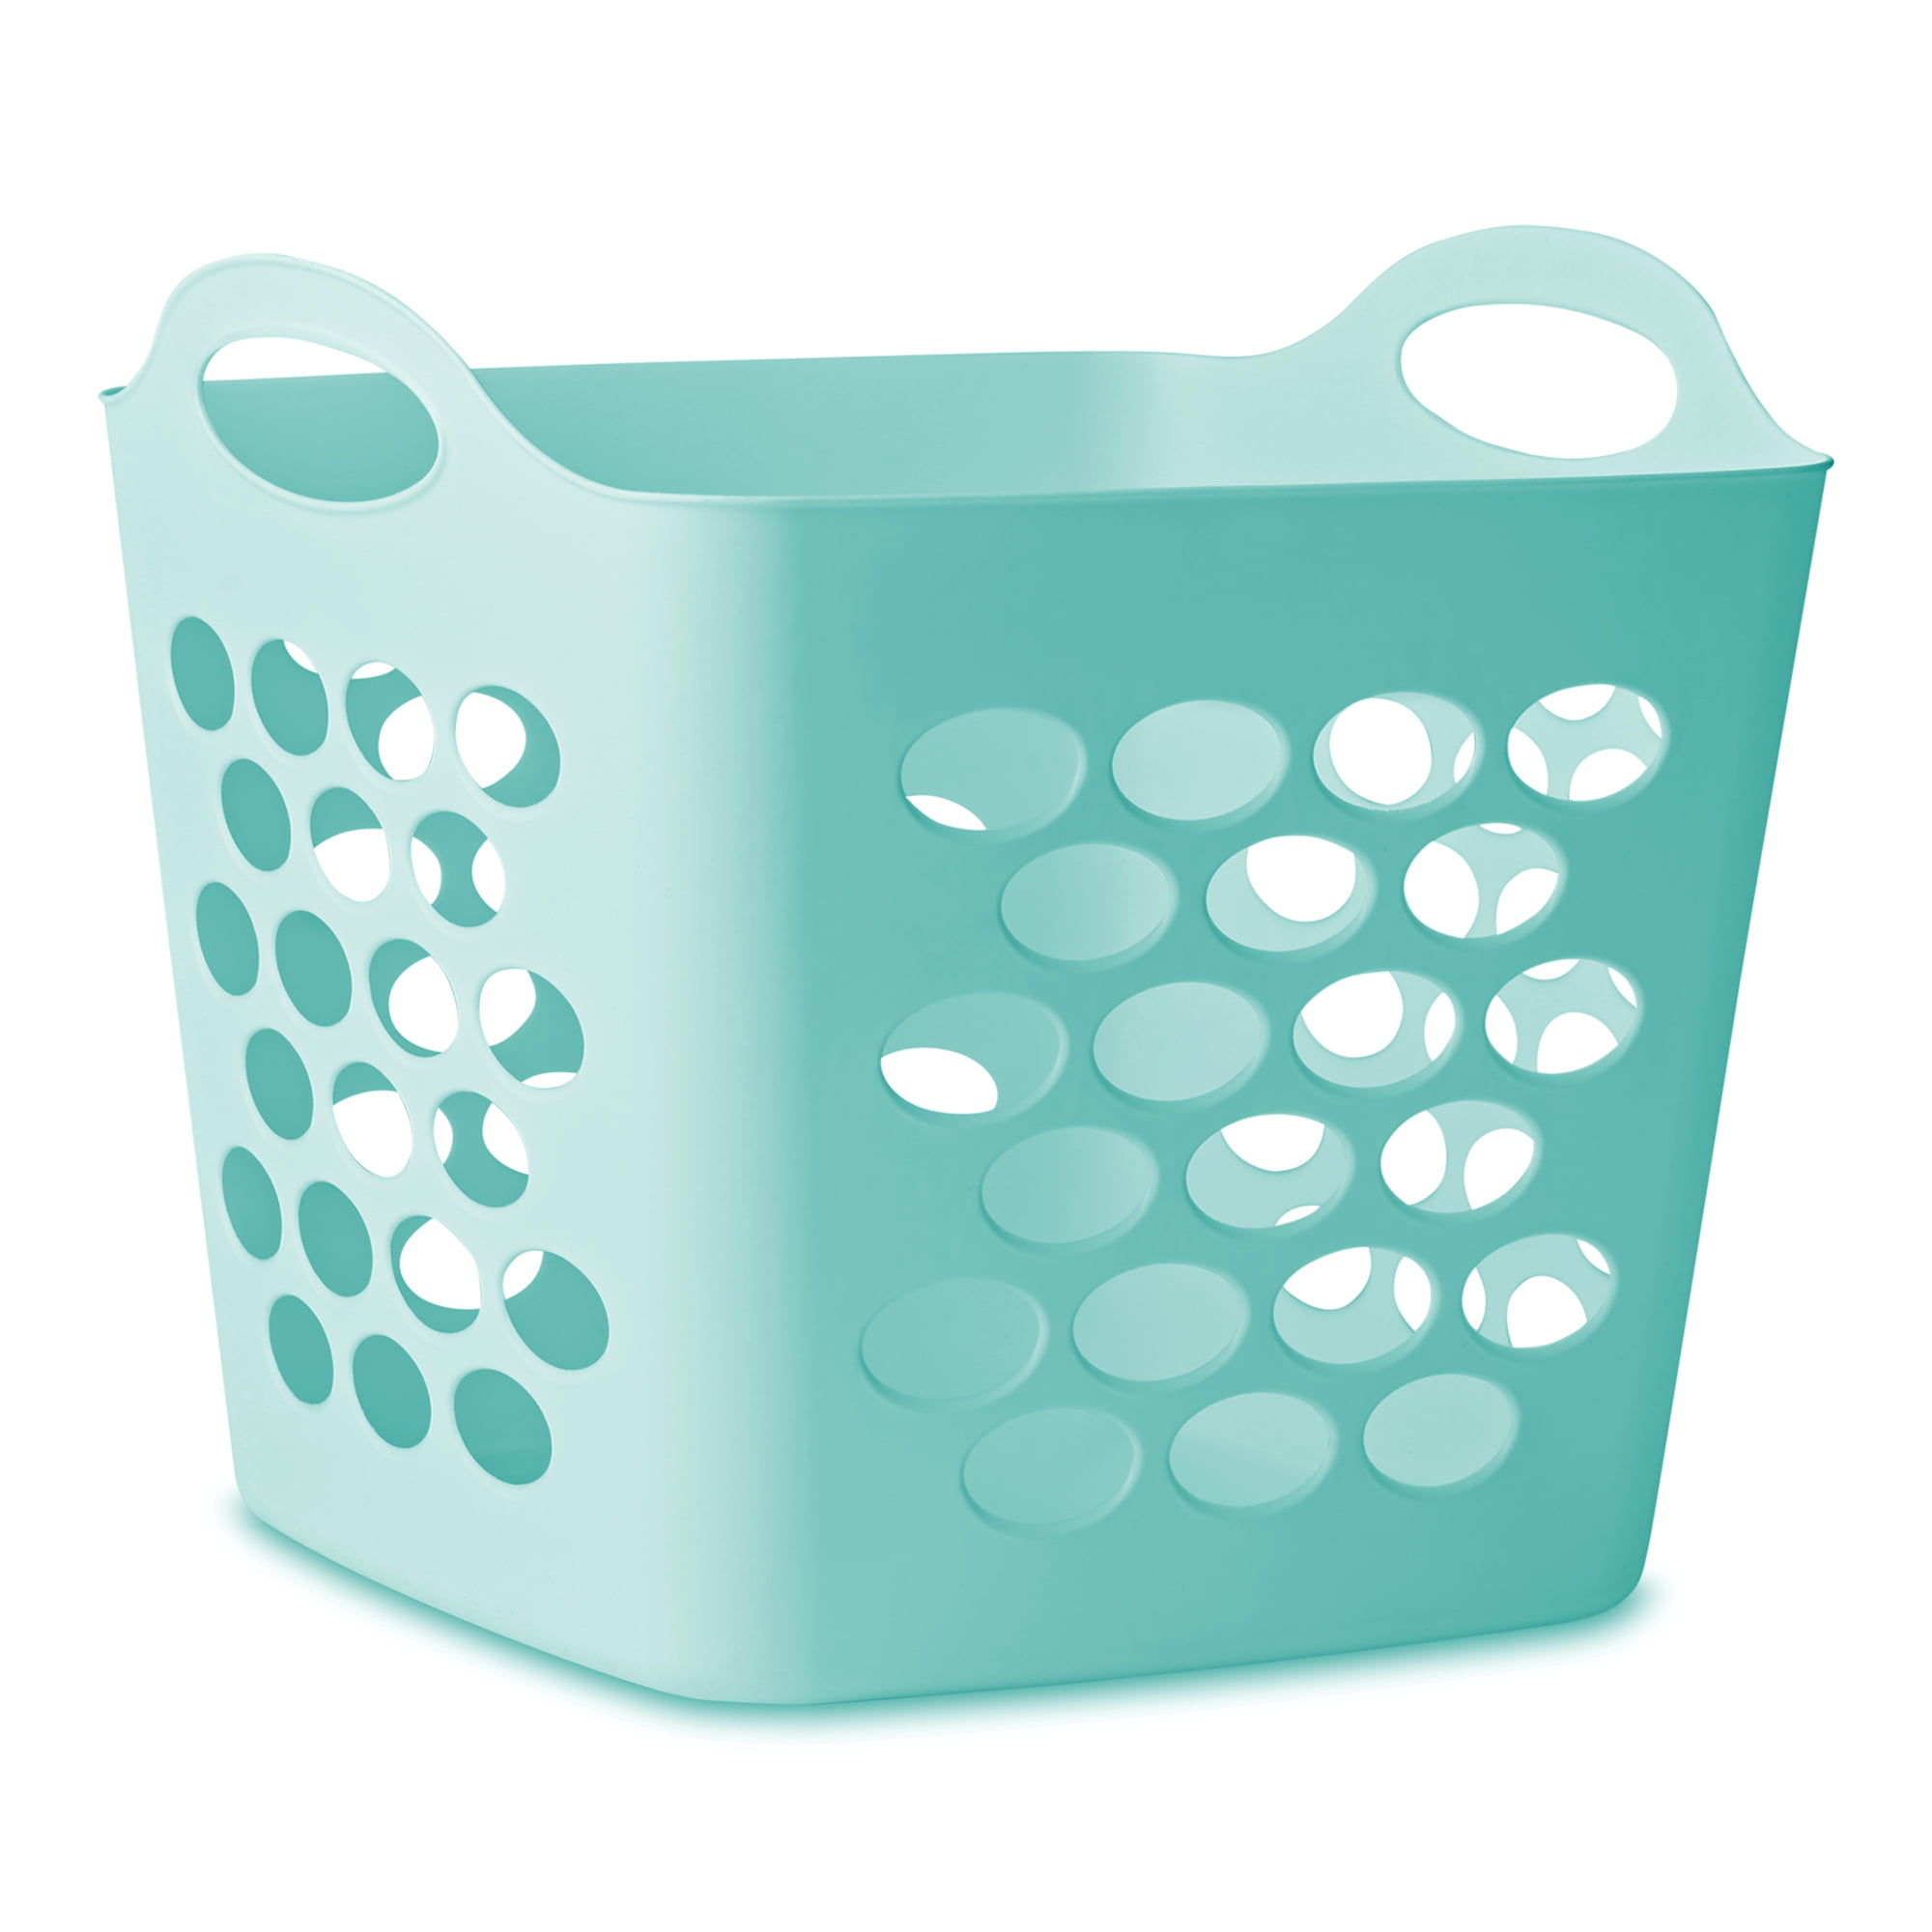 Asters - Clothes drying rack , laundry basket, plastic basins ,laundry bag  ++ Visit today or order online:  laundry-accessories